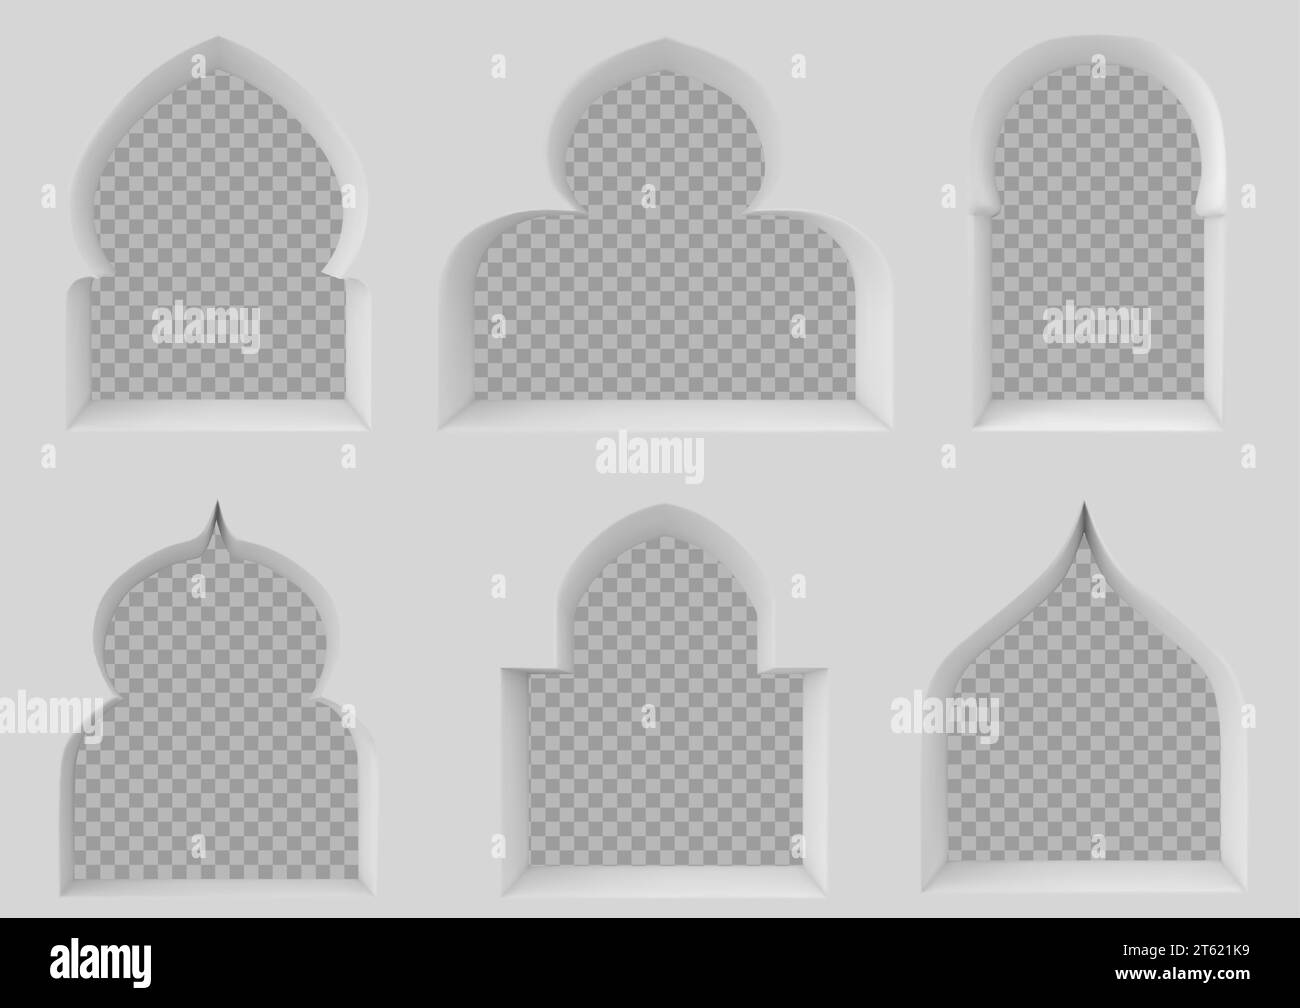 Arch window of mosque or muslim building with transparent hole. Realistic vector illustration set of islamic or indian traditional style geometric arc shape frames of door or gate in white wall. Stock Vector